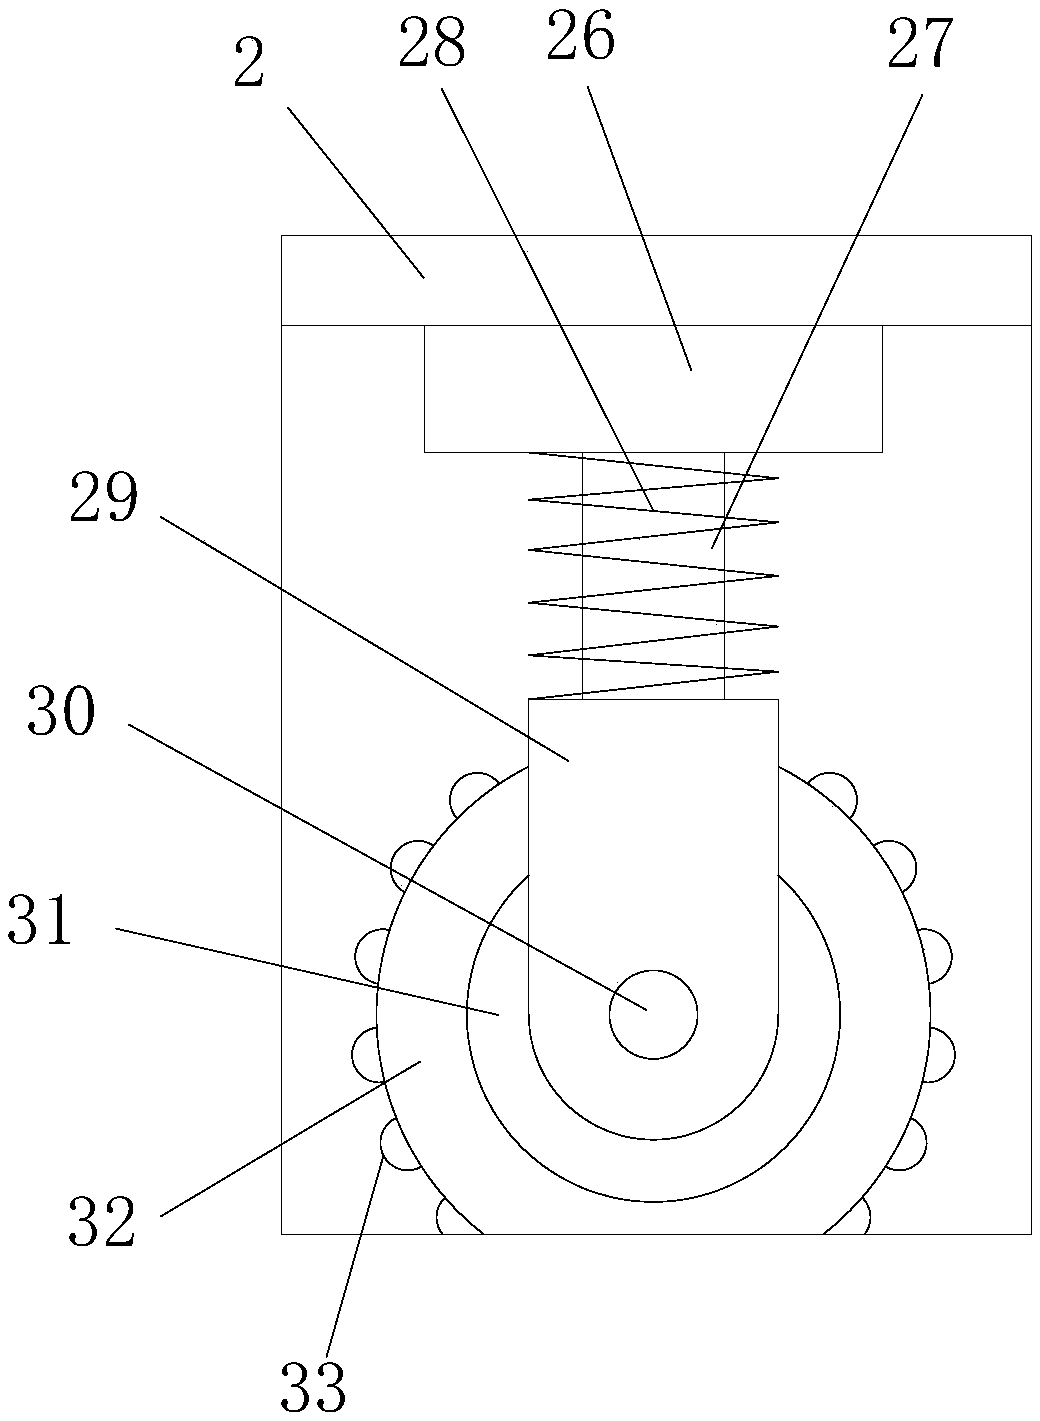 Grinding device used for brush machining